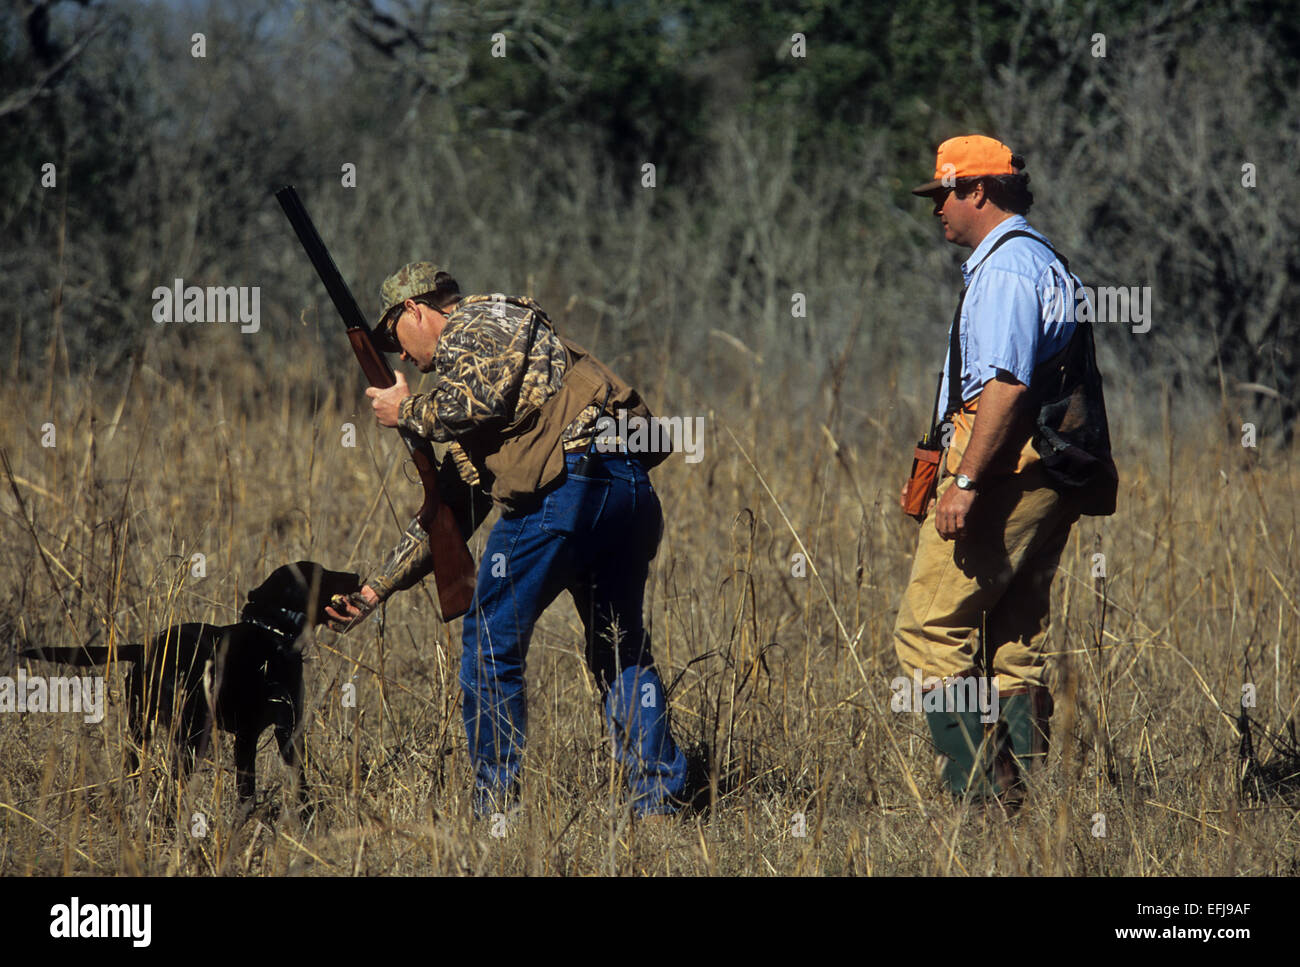 A hunter takes a bobwhite from his dog while quail hunting South Texas Stock Photo